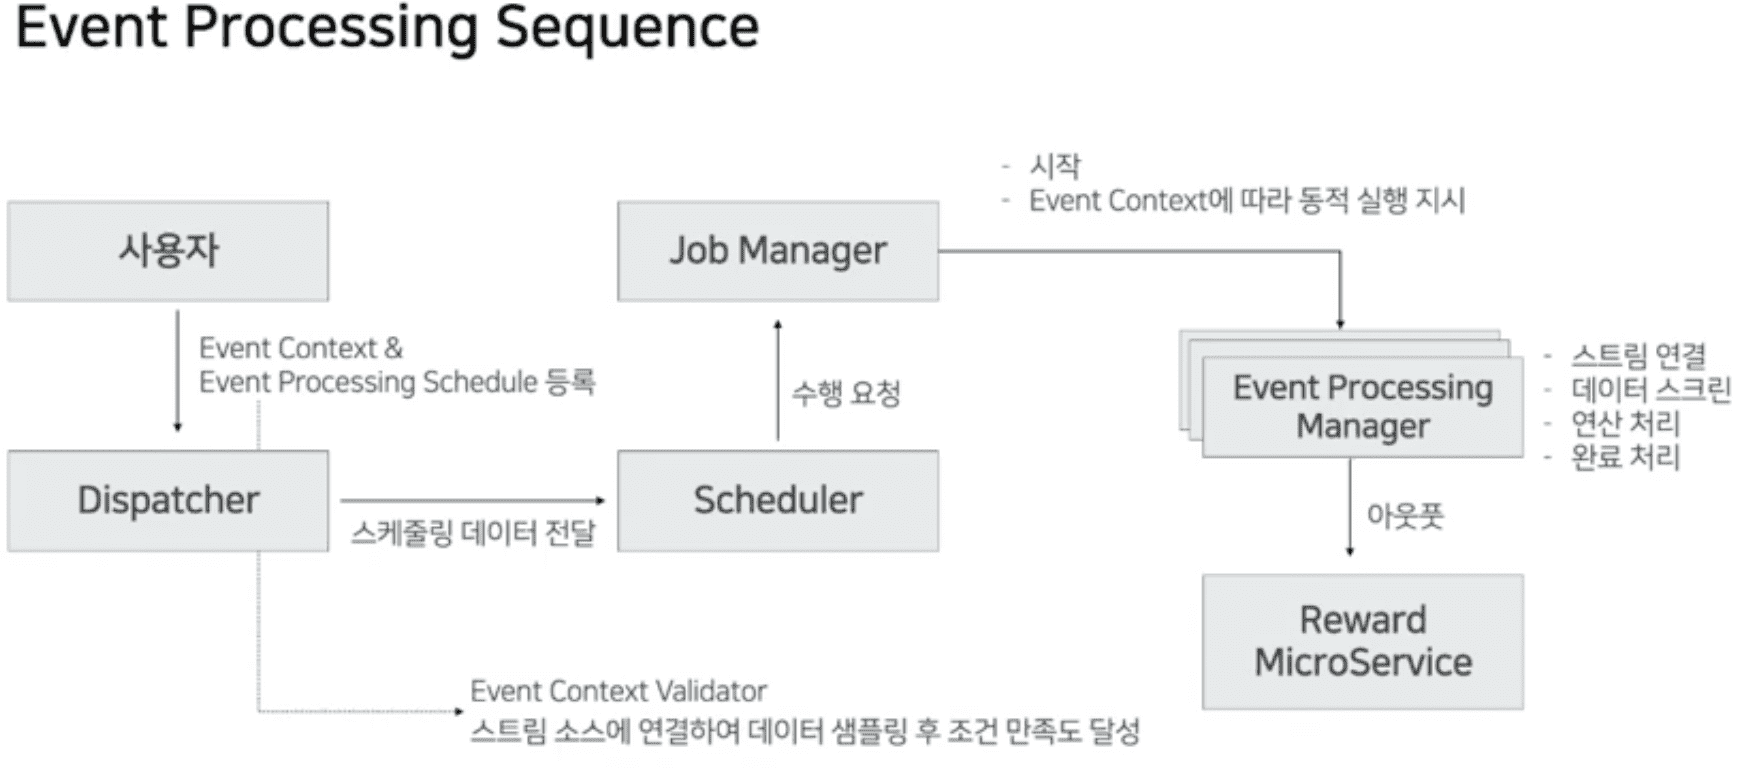 event processing sequence